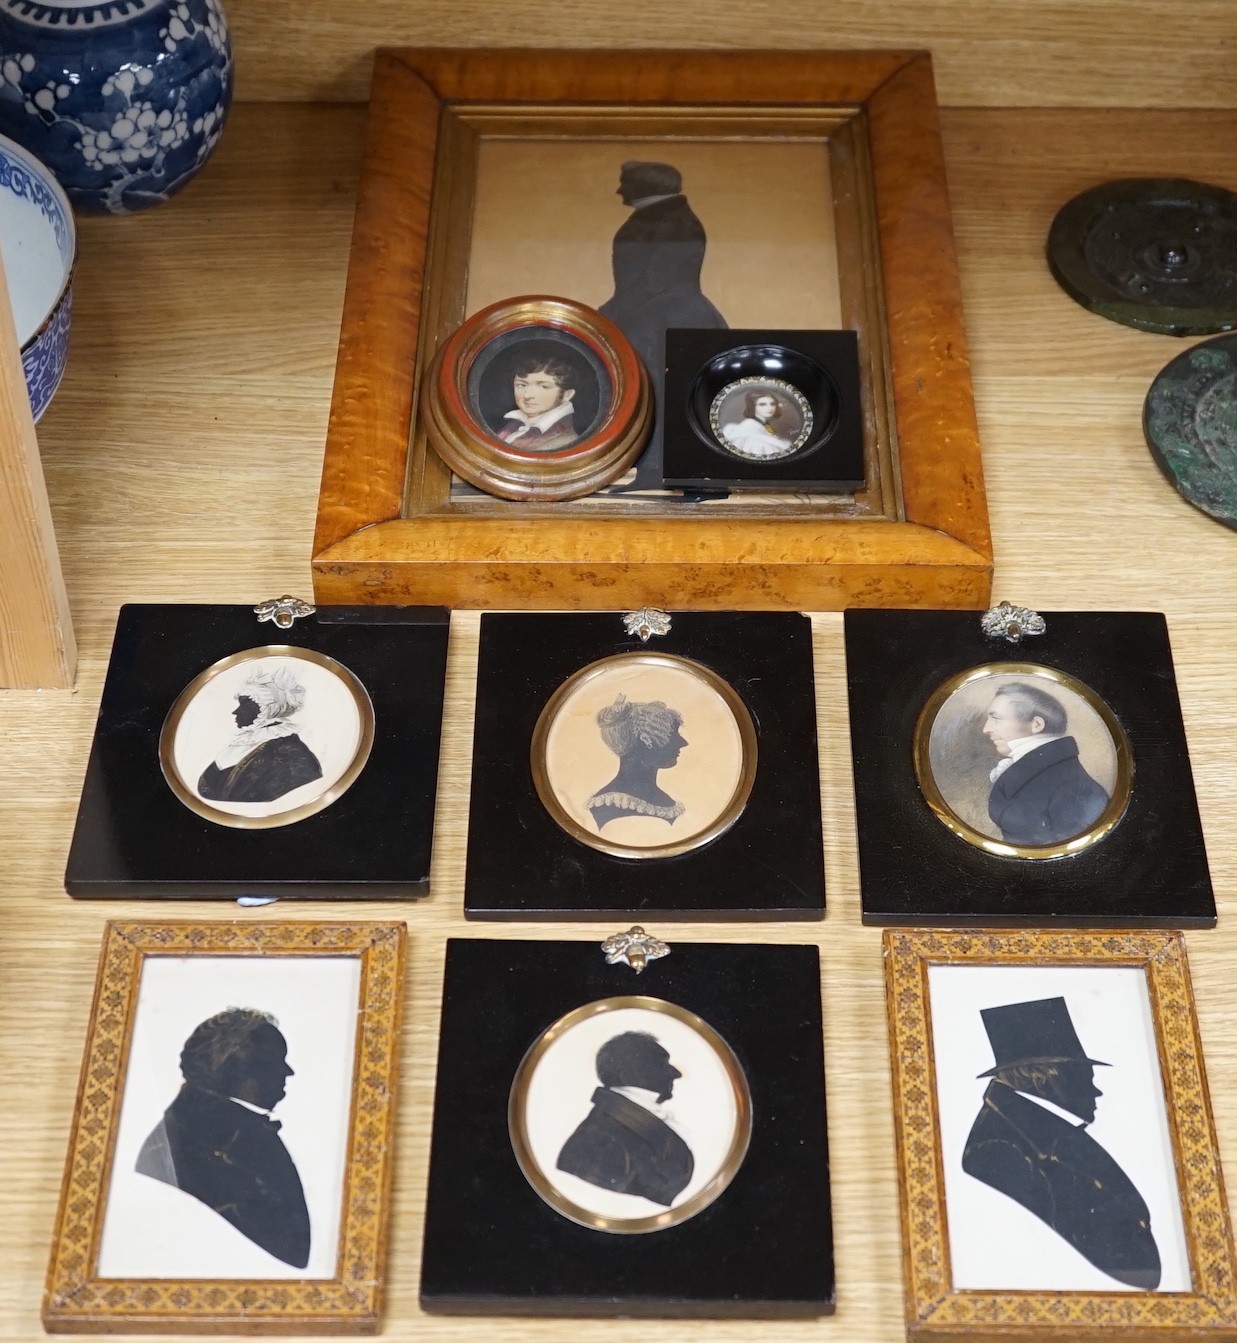 19th century English School, a group of silhouettes and portraits, largest 27 x 17cm